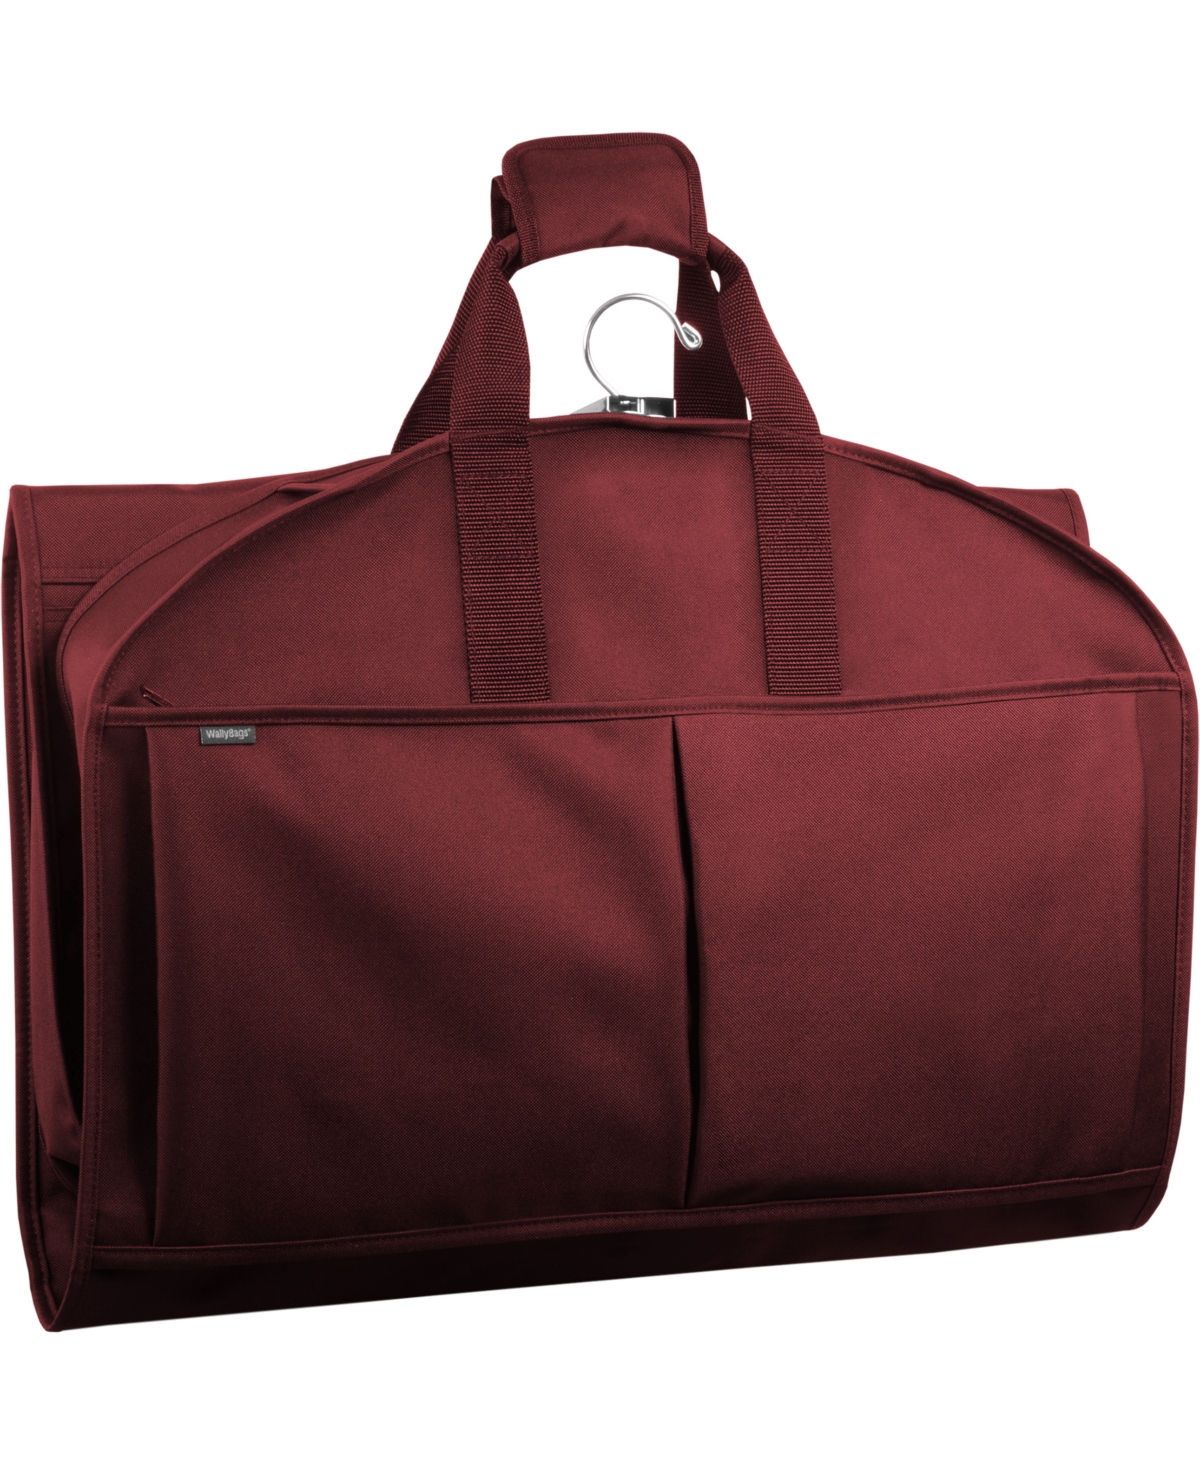 WALLYBAGS 48" DELUXE TRI-FOLD GARMENTOTE WITH POCKETS